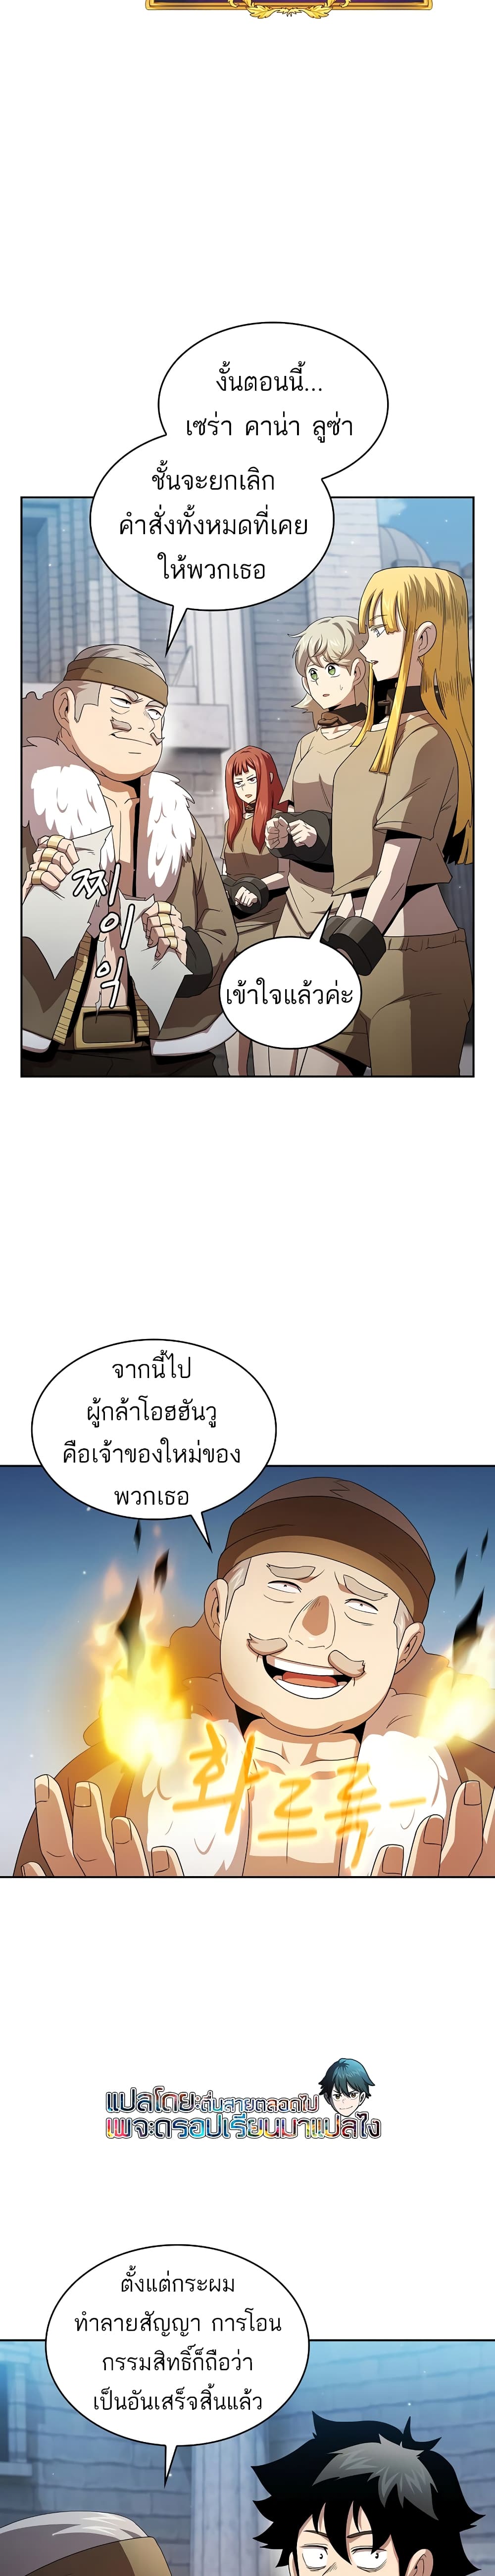 Is This Hero for Real à¸à¸­à¸à¸à¸µà¹ 31 (14)